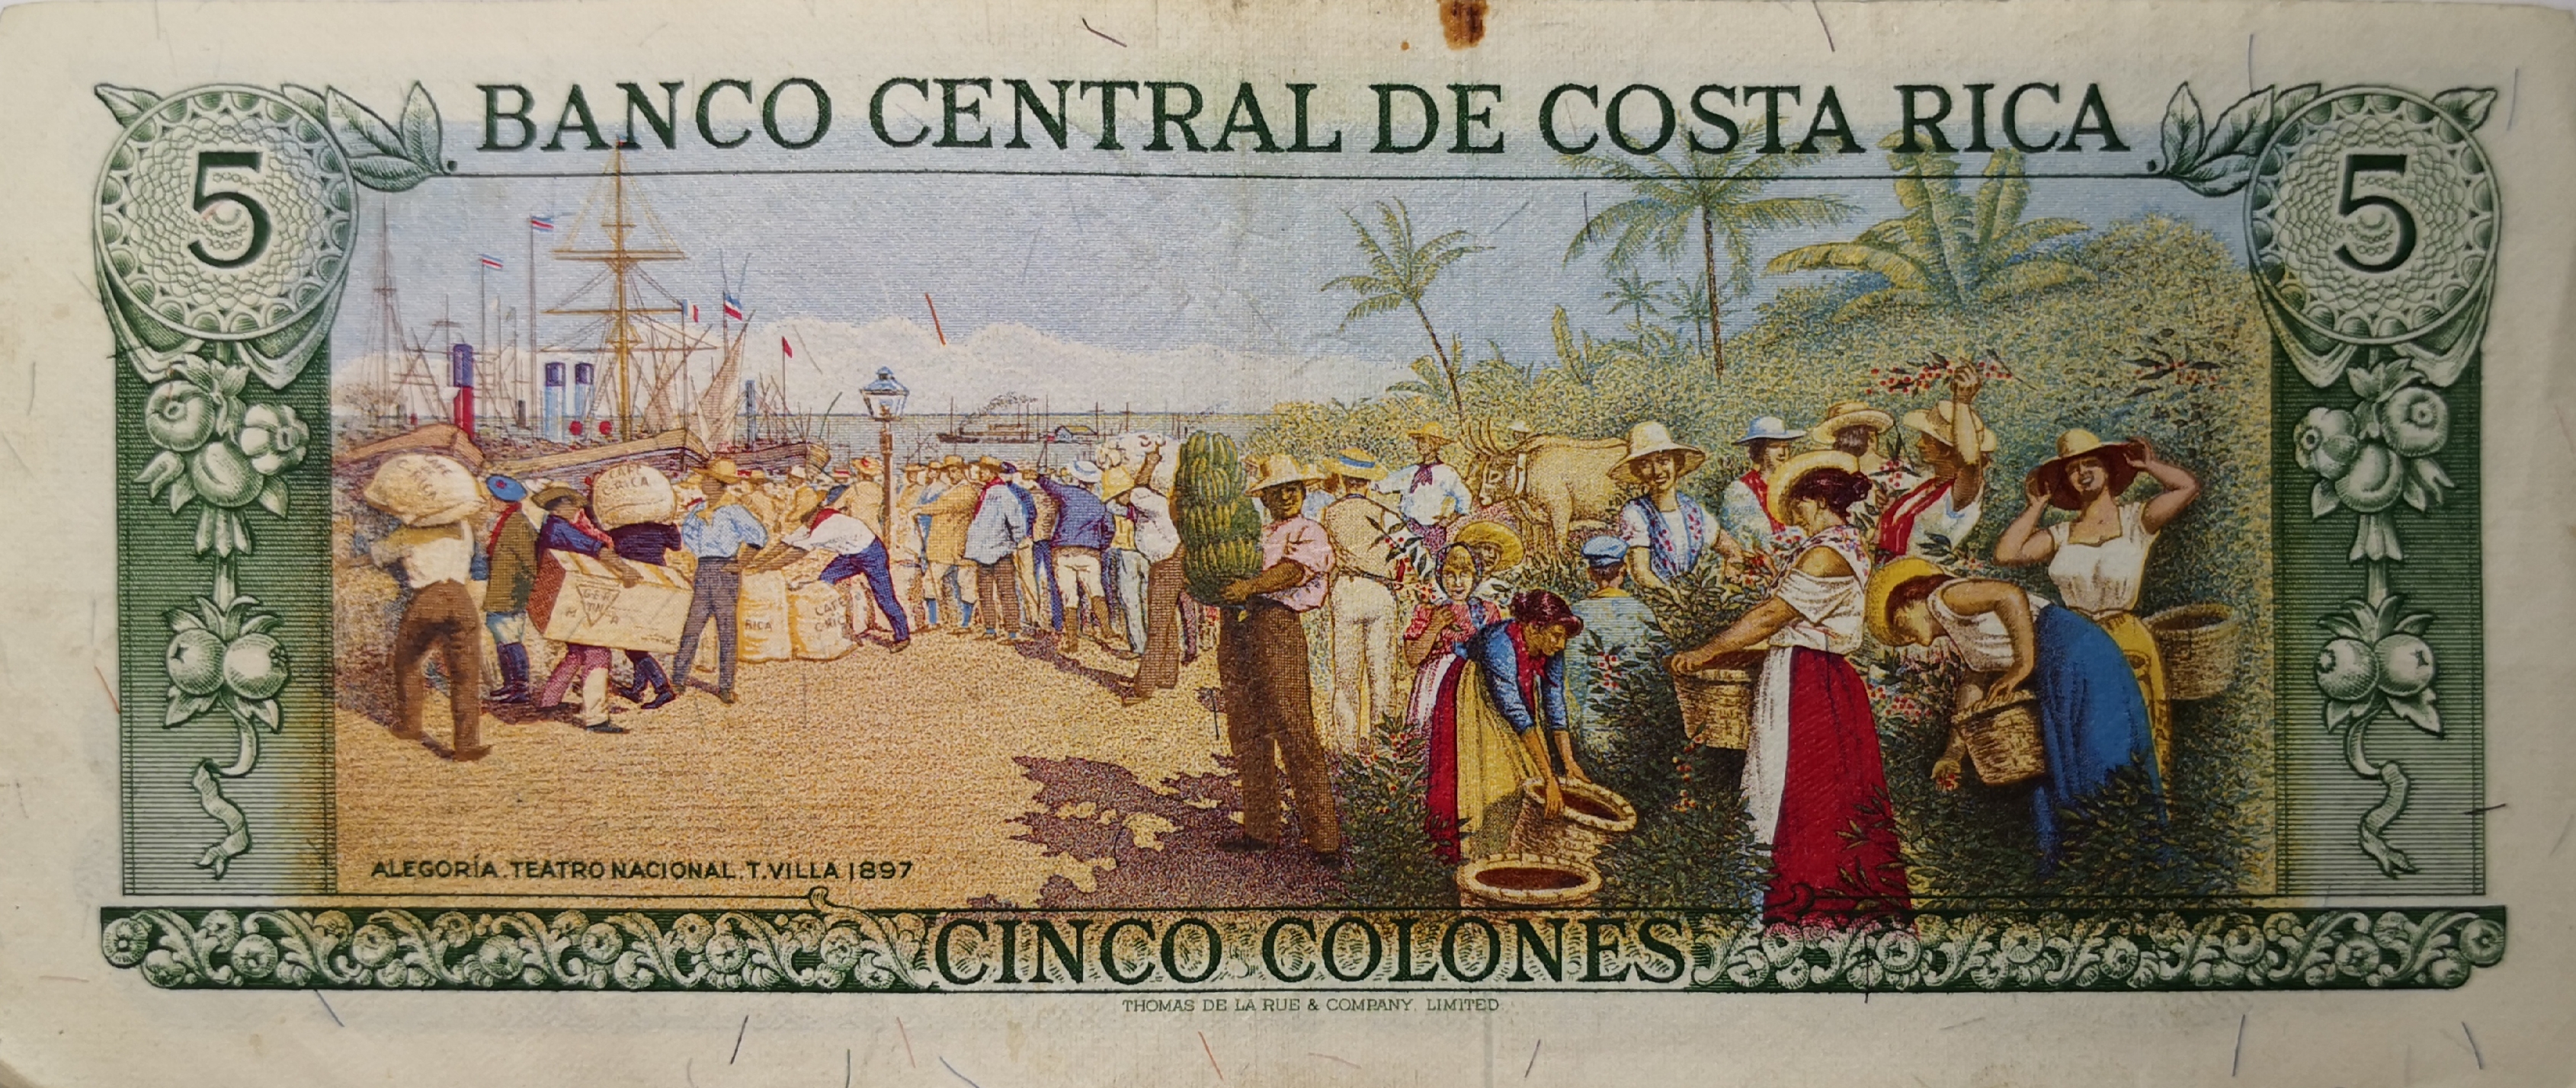 COSTA RICA 5 COLONES P S122 1917 UN ISSUED With Out SIGNATURE UNC MONEY NOTE 